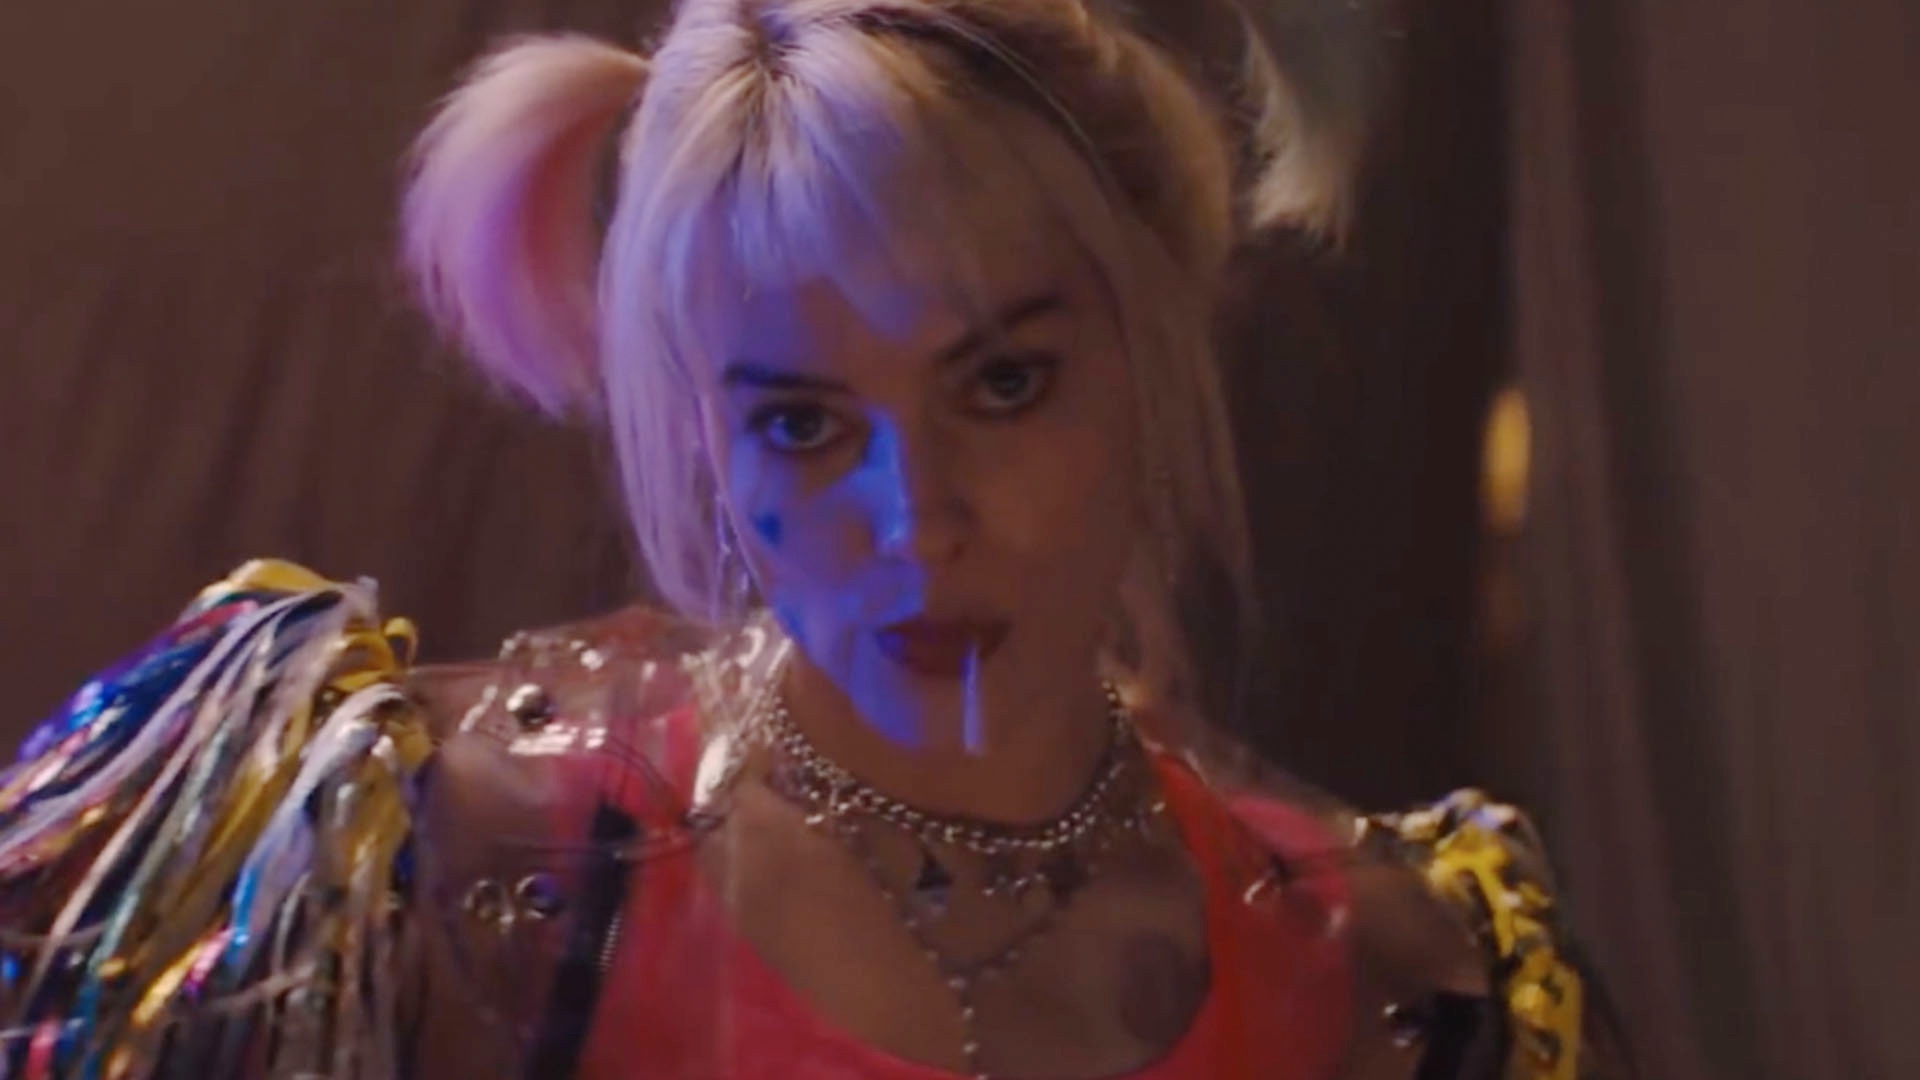 New BIRDS OF PREY Photo of Margot Robbie as Harley Quinn; Is This 